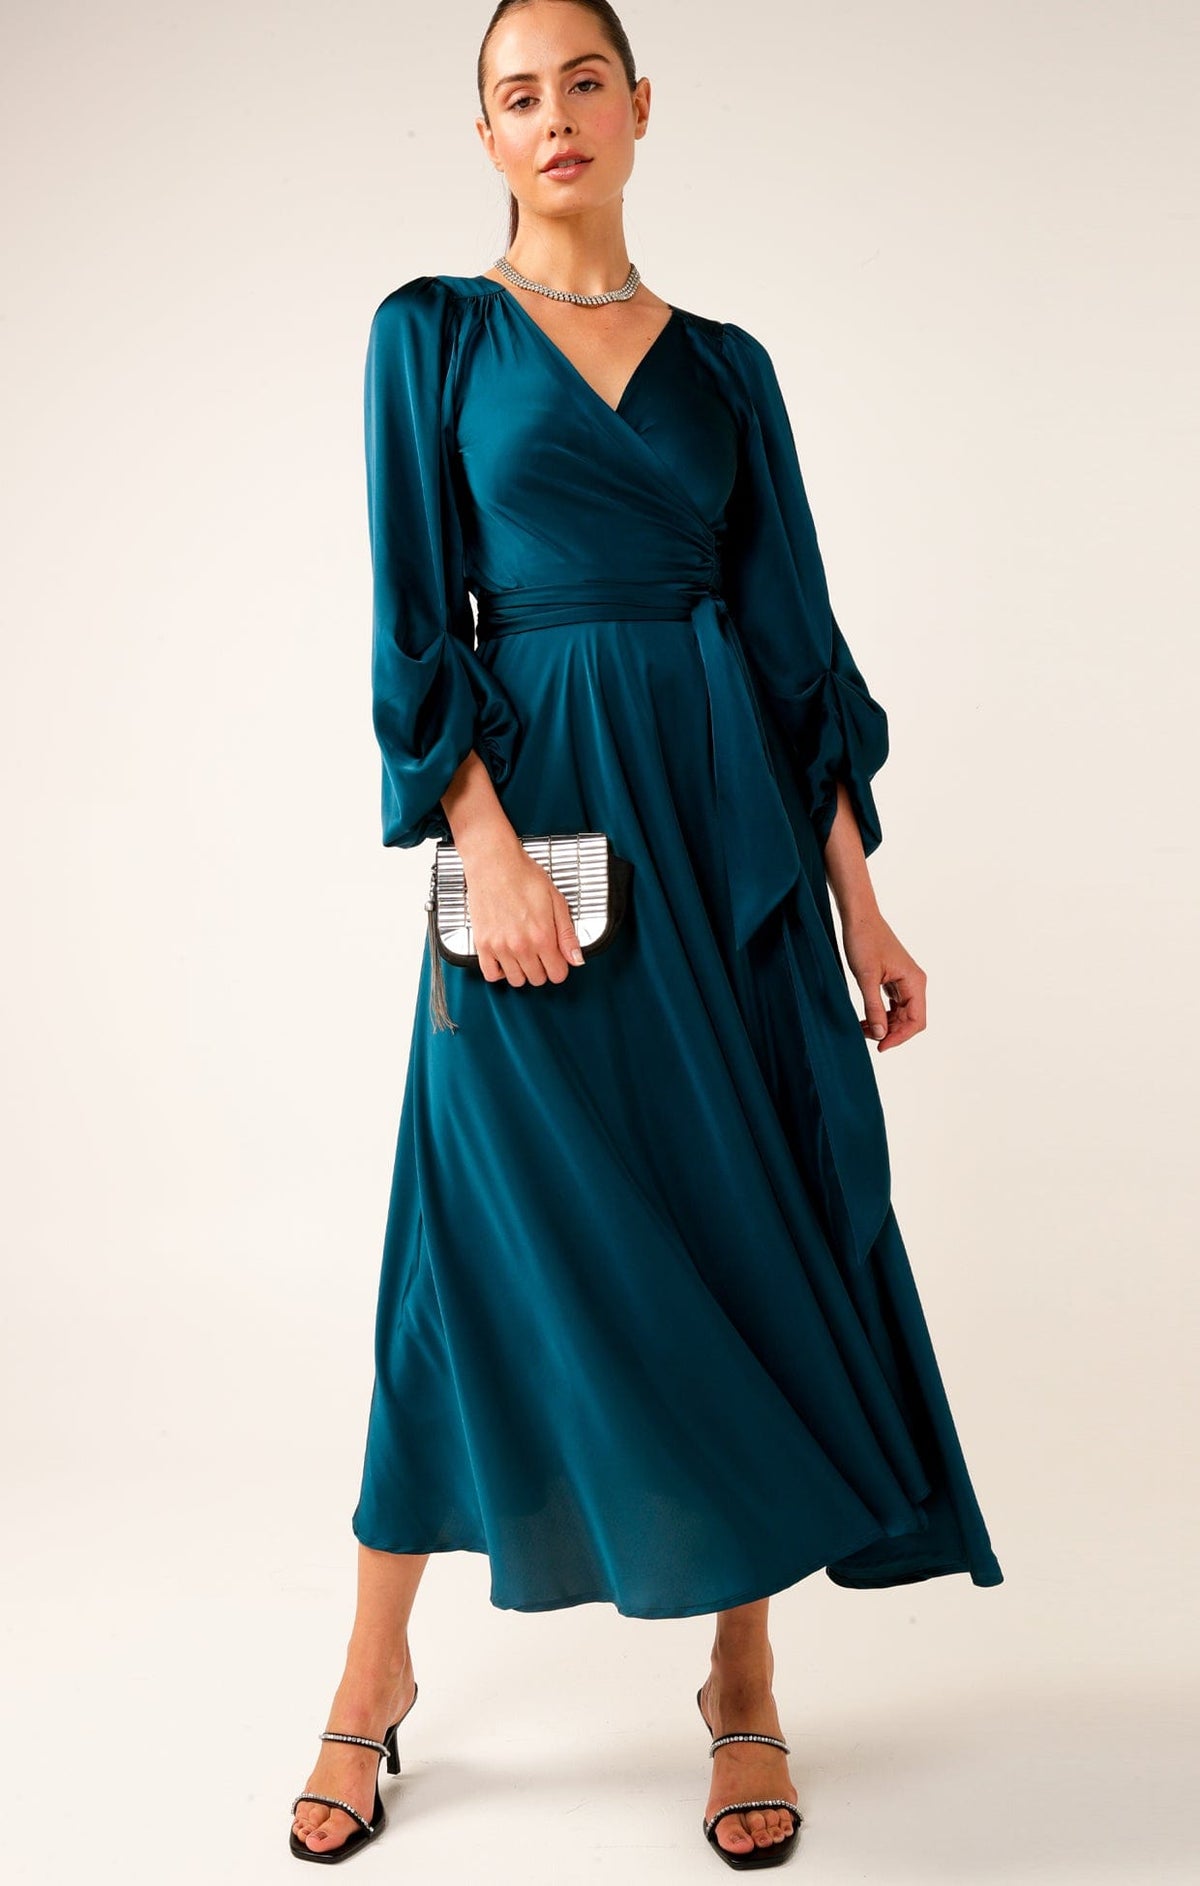 Dresses Events DIMMI WRAP DRESS IN PEACOCK